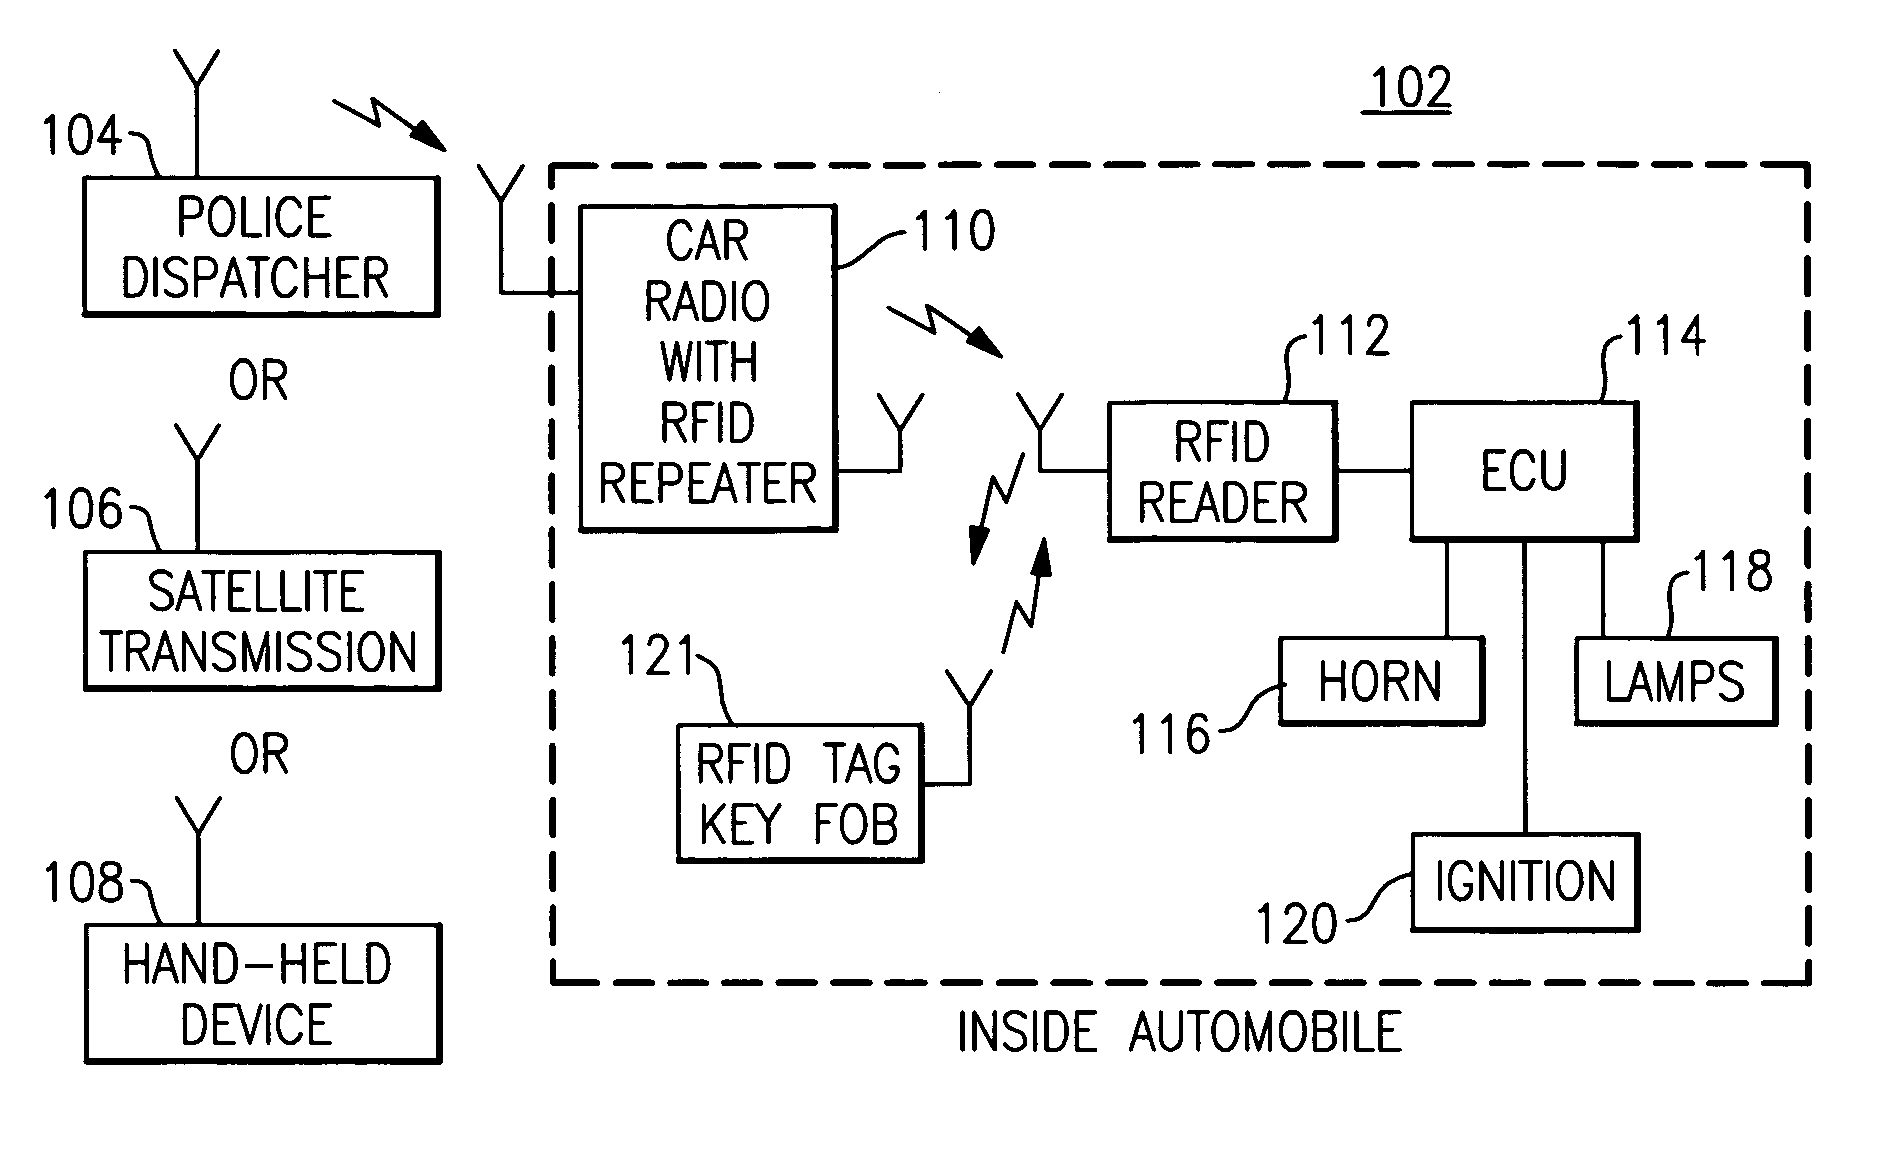 Anti-carjacking apparatus, systems, and methods for hi-speed pursuit avoidance and occupant safety